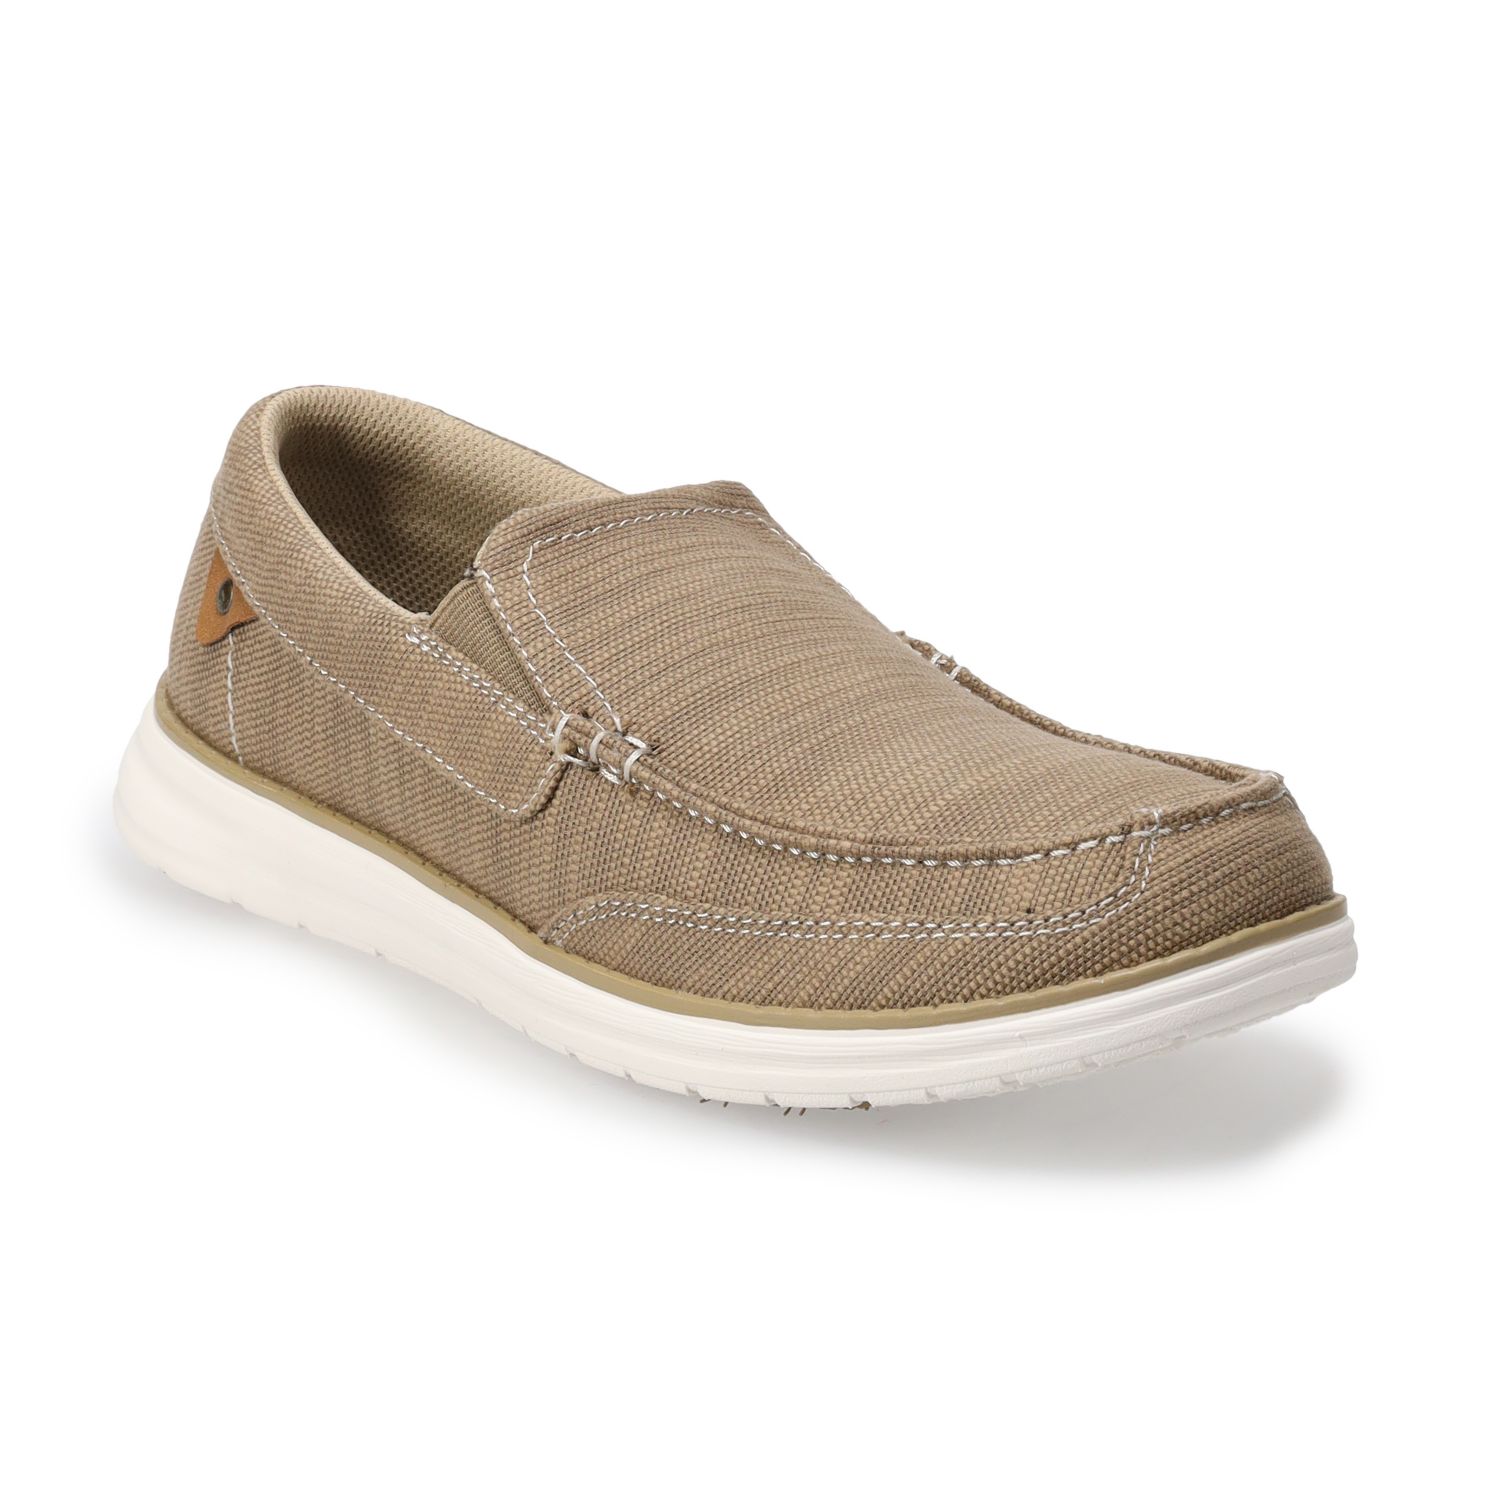 mens slip on canvas boat shoes